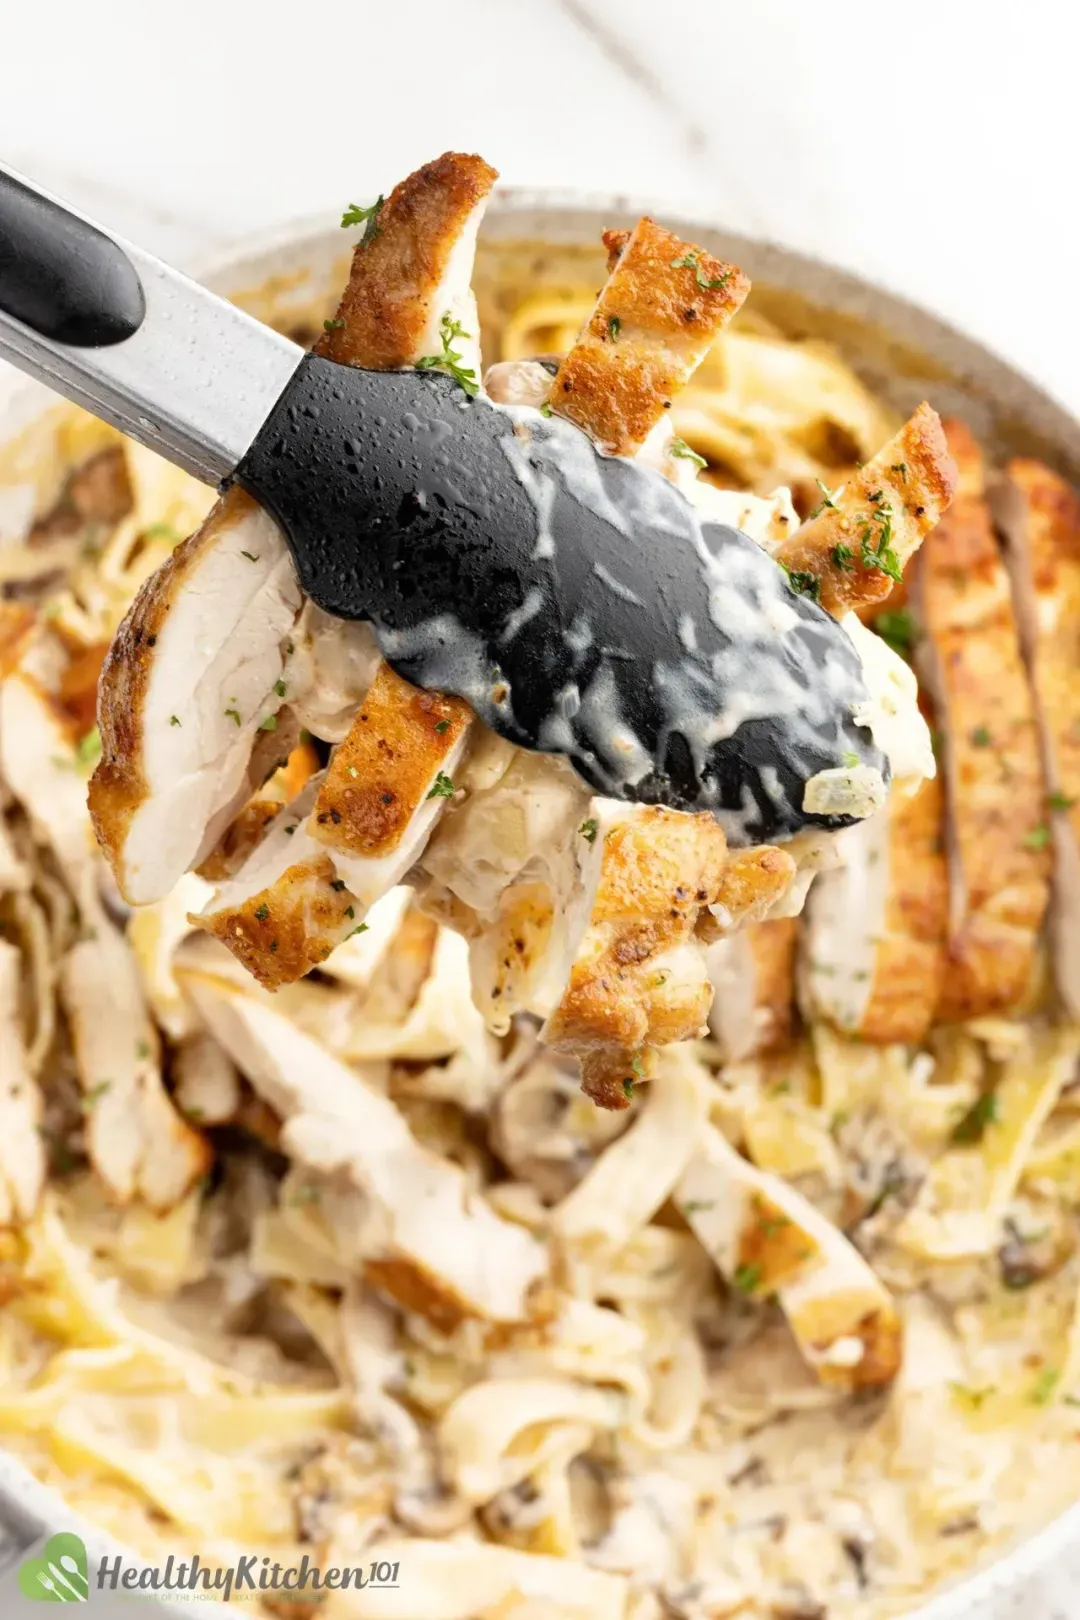 Tongs picking up slices of cooked chicken from a pan of Chicken Alfredo